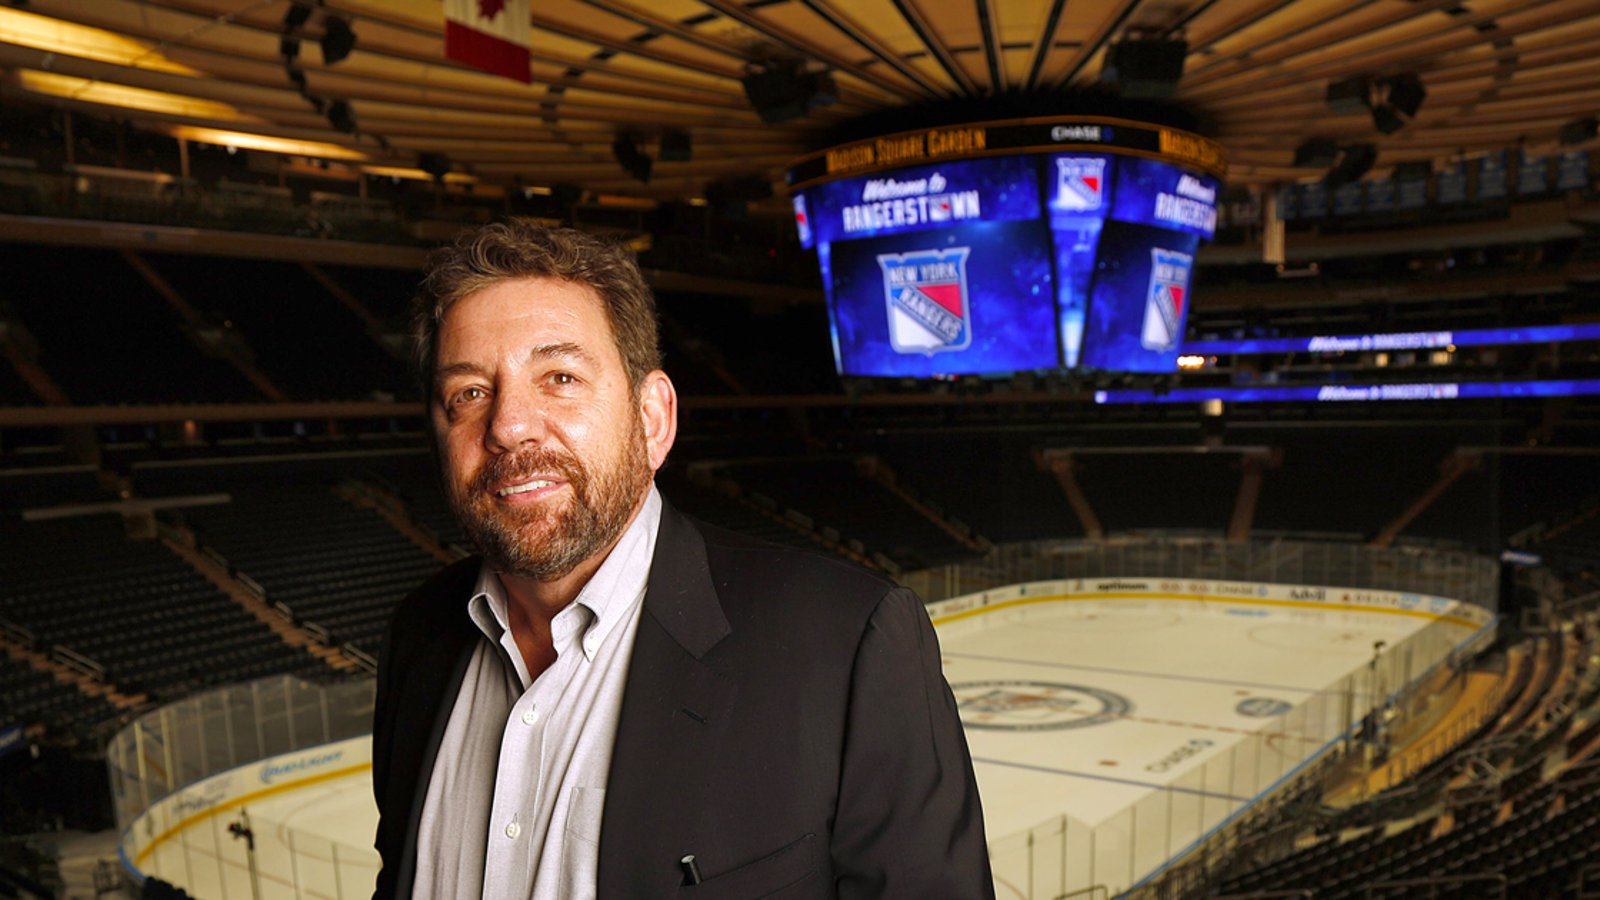 Rangers owner James Dolan sued for making too much money and for focusing on his rock band too much